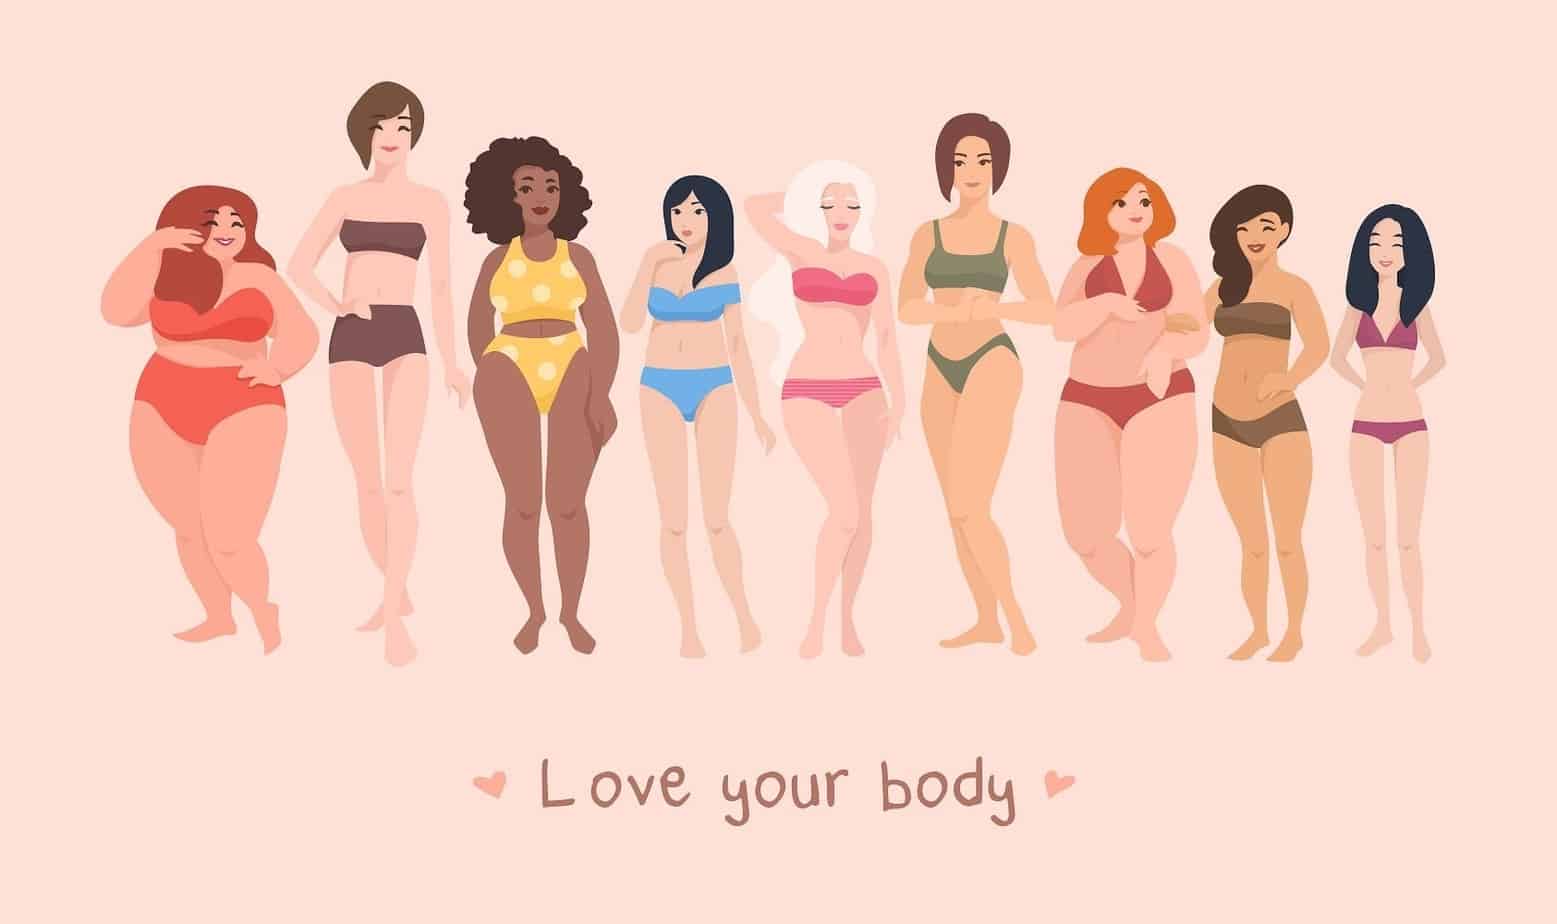 Learn to Love Your Body